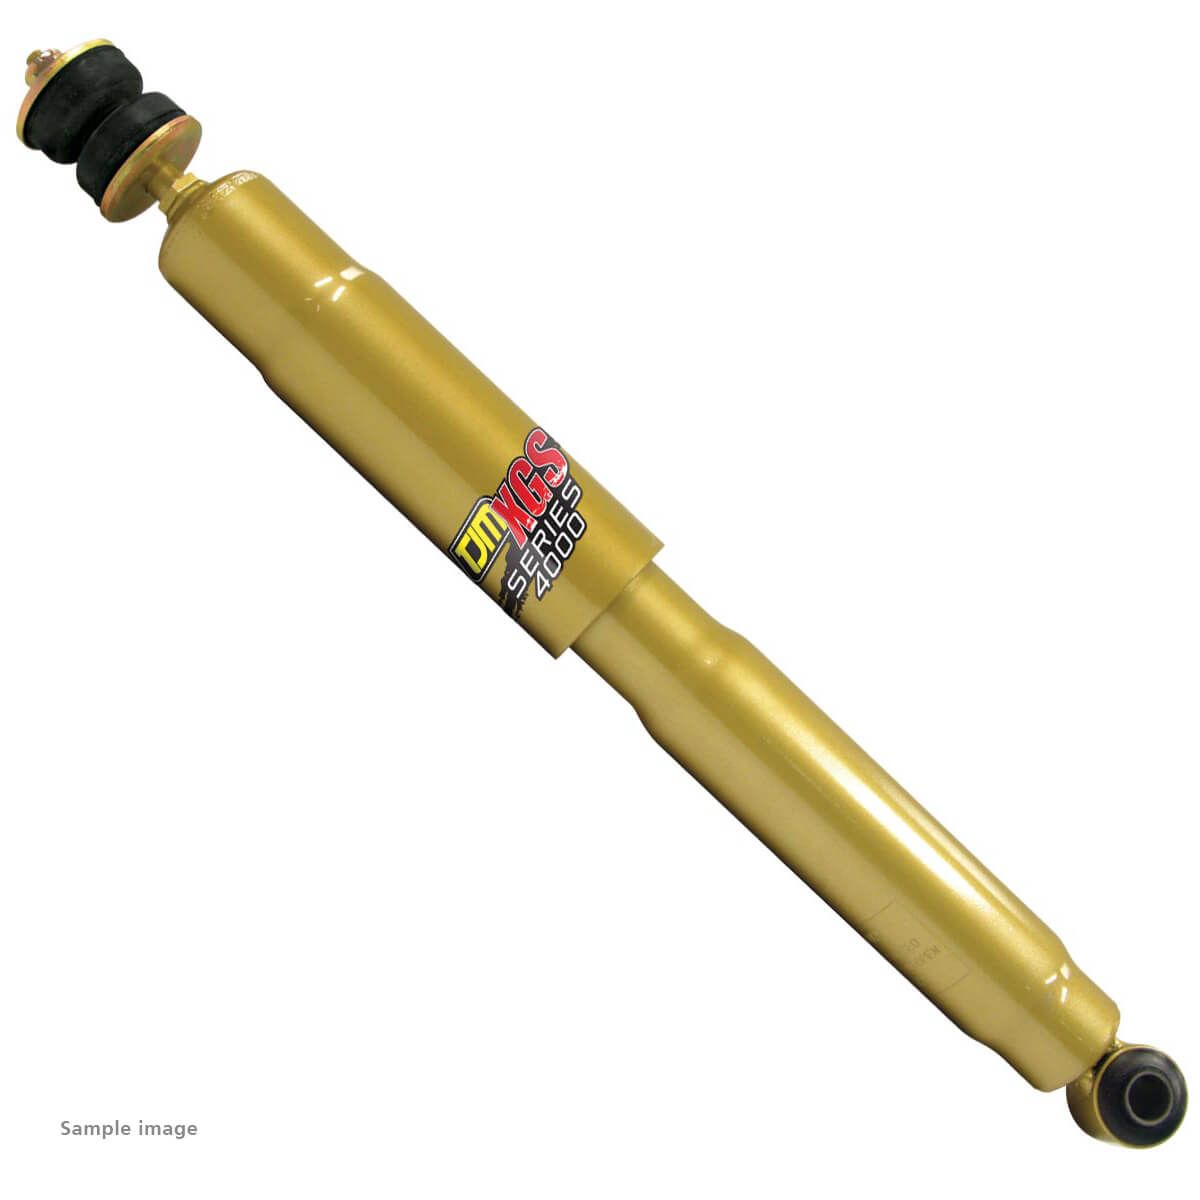 Information about TJM XGS GOLD EDITION SHOCK SERIE 80 FW